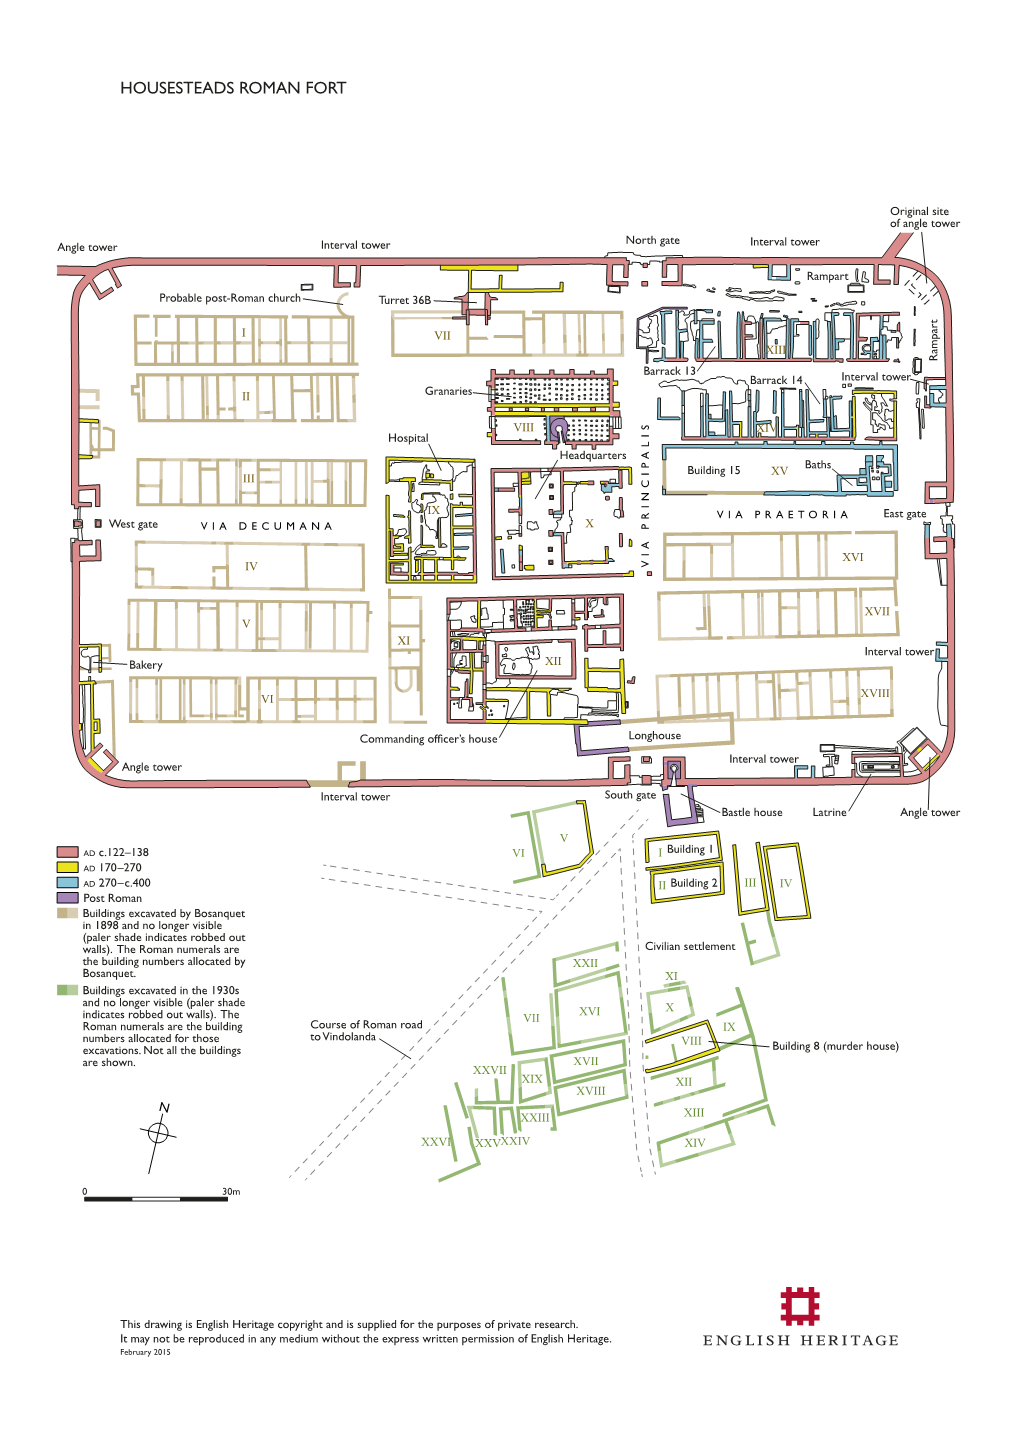 Download a Plan of Housesteads Roman Fort